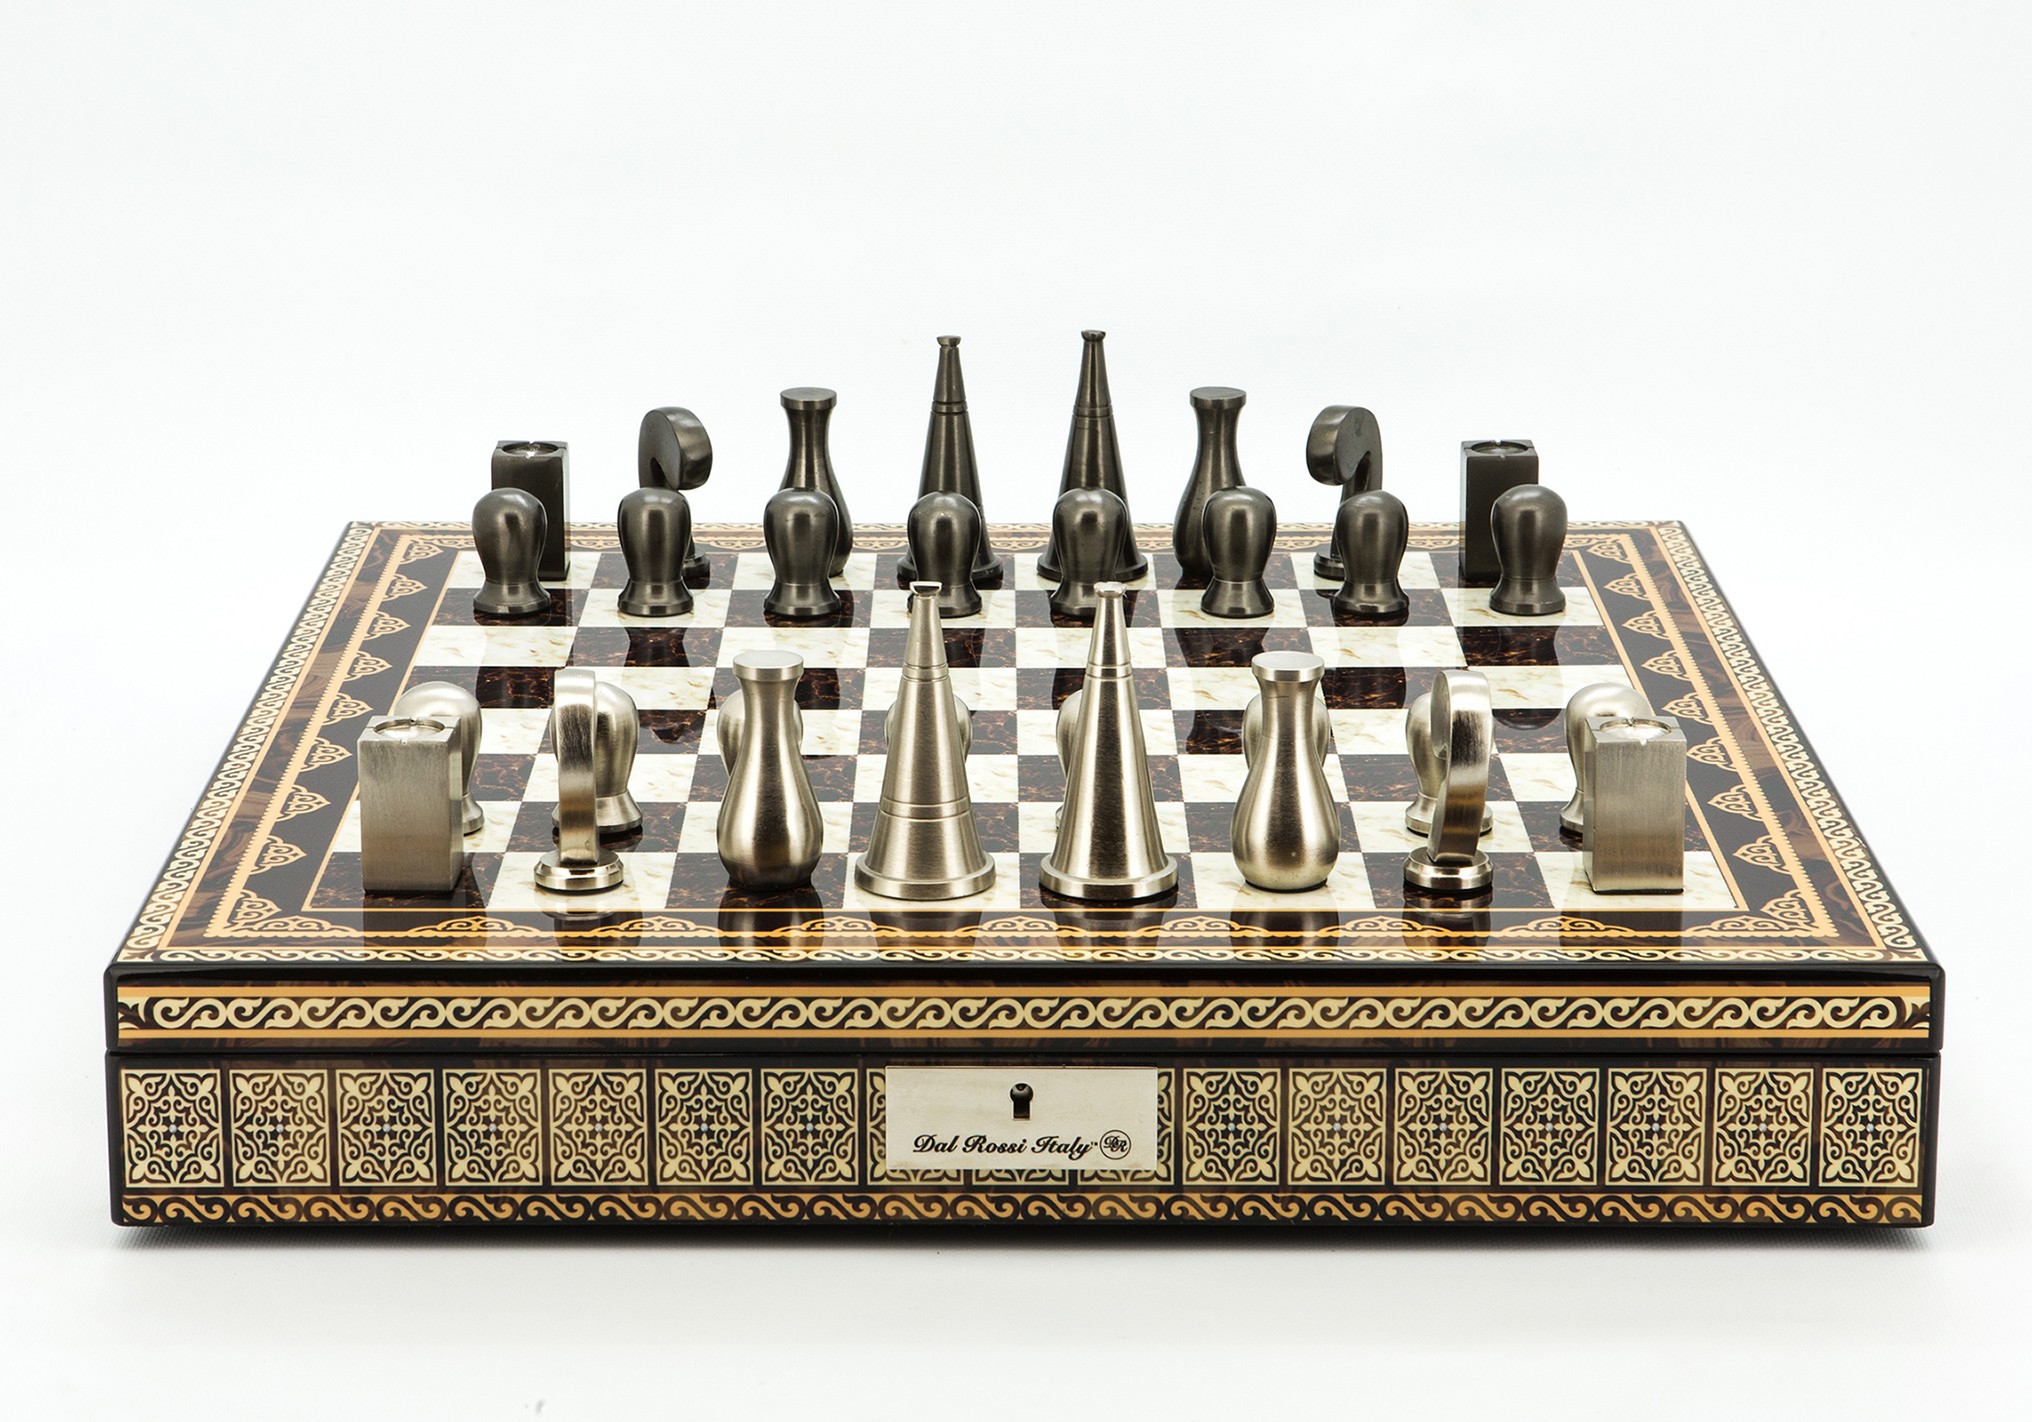 Dal Rossi Italy Chess Set Mosaic Finish 20″ With Compartments, With Metal Dark Titanium and Silver 90mm Chessmen